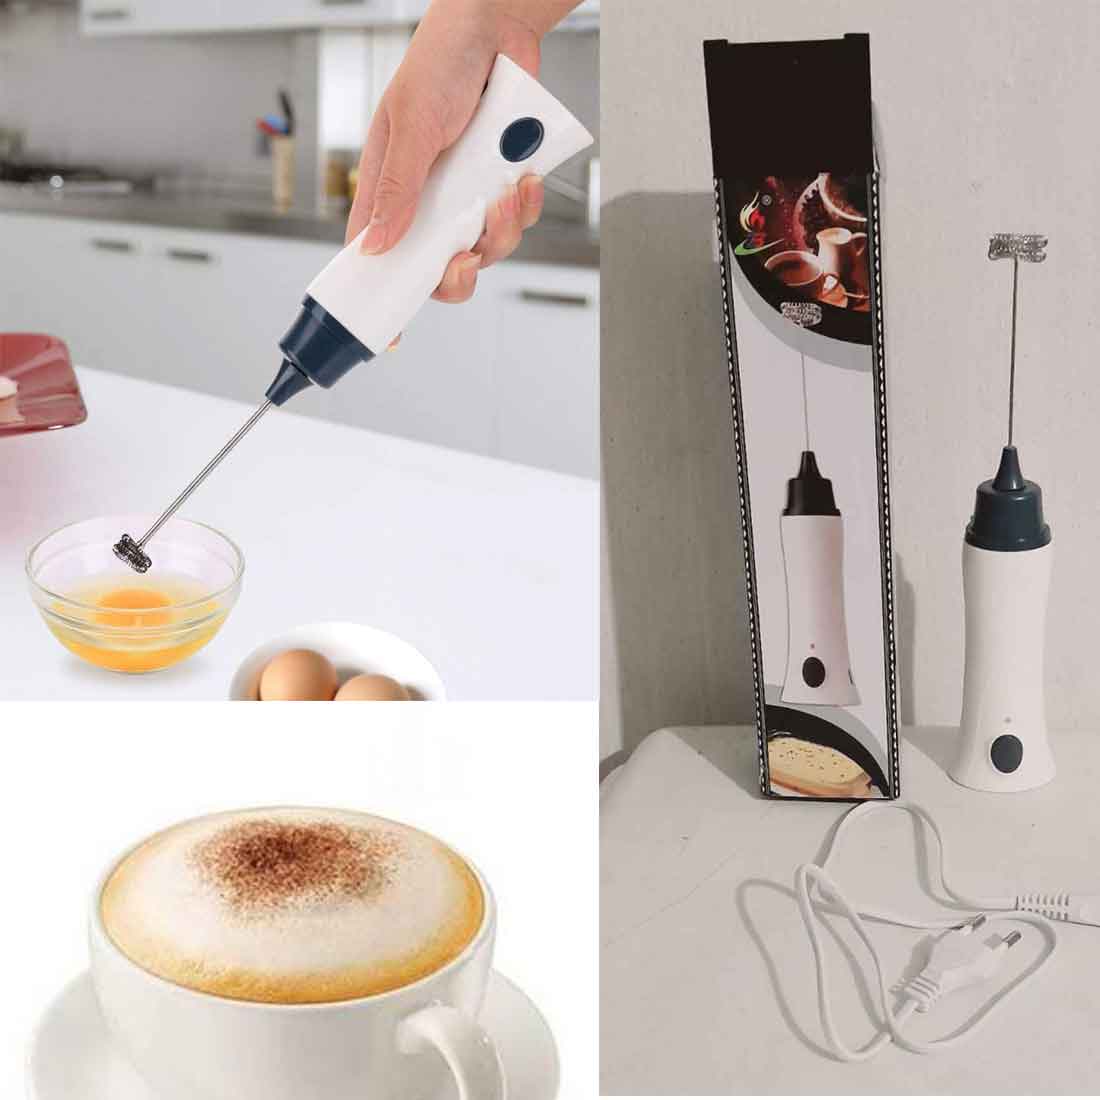 Rechargeable Hand Coffee Mixer, Milk Frother